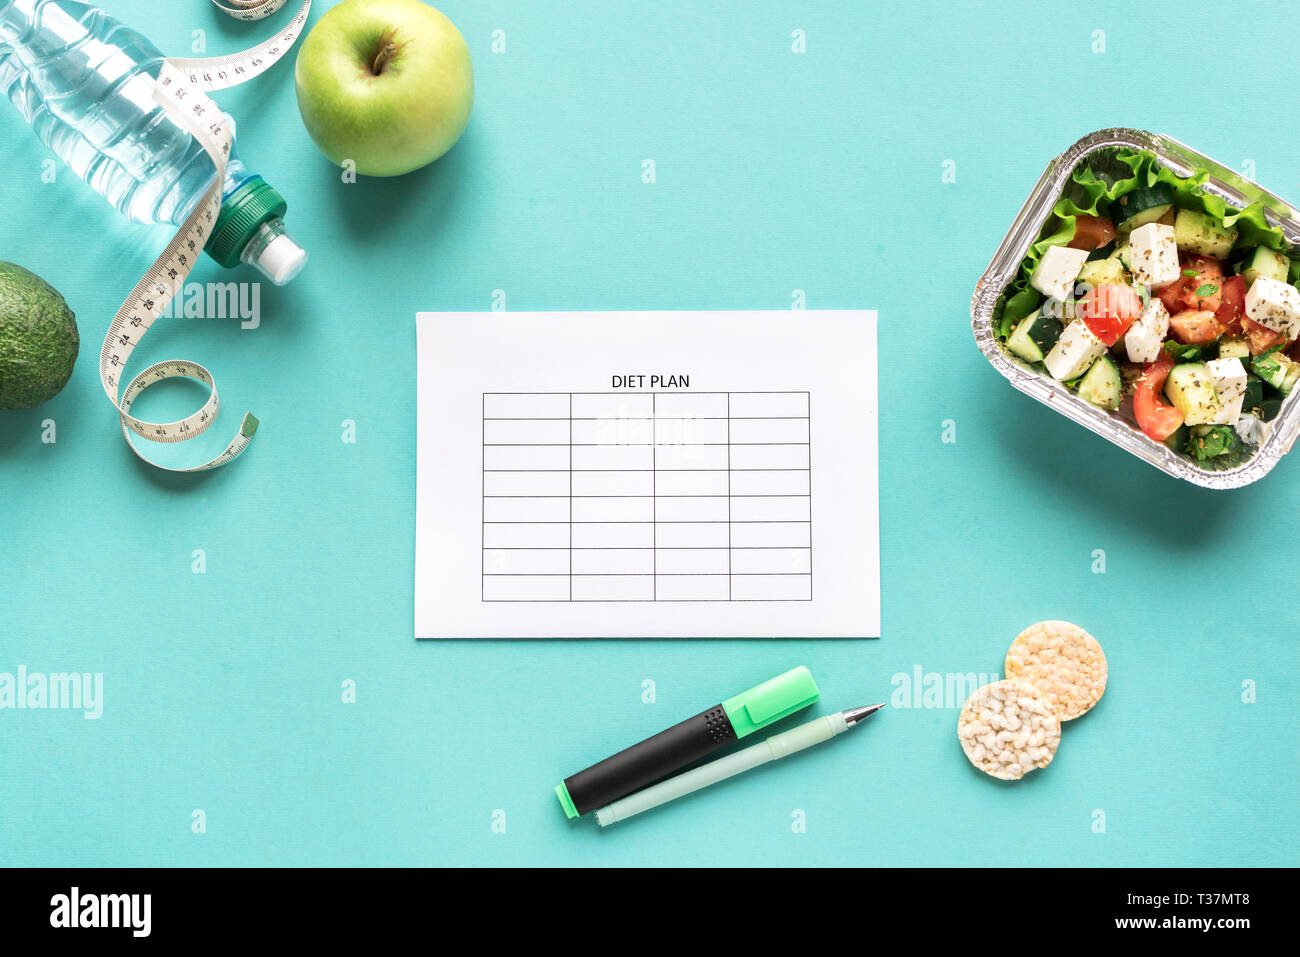 Diet meal plan mockup with water, fruits, salad and measuring tape. Fitness nutrition, diet concept on blue, top view, copy space. Stock Photo